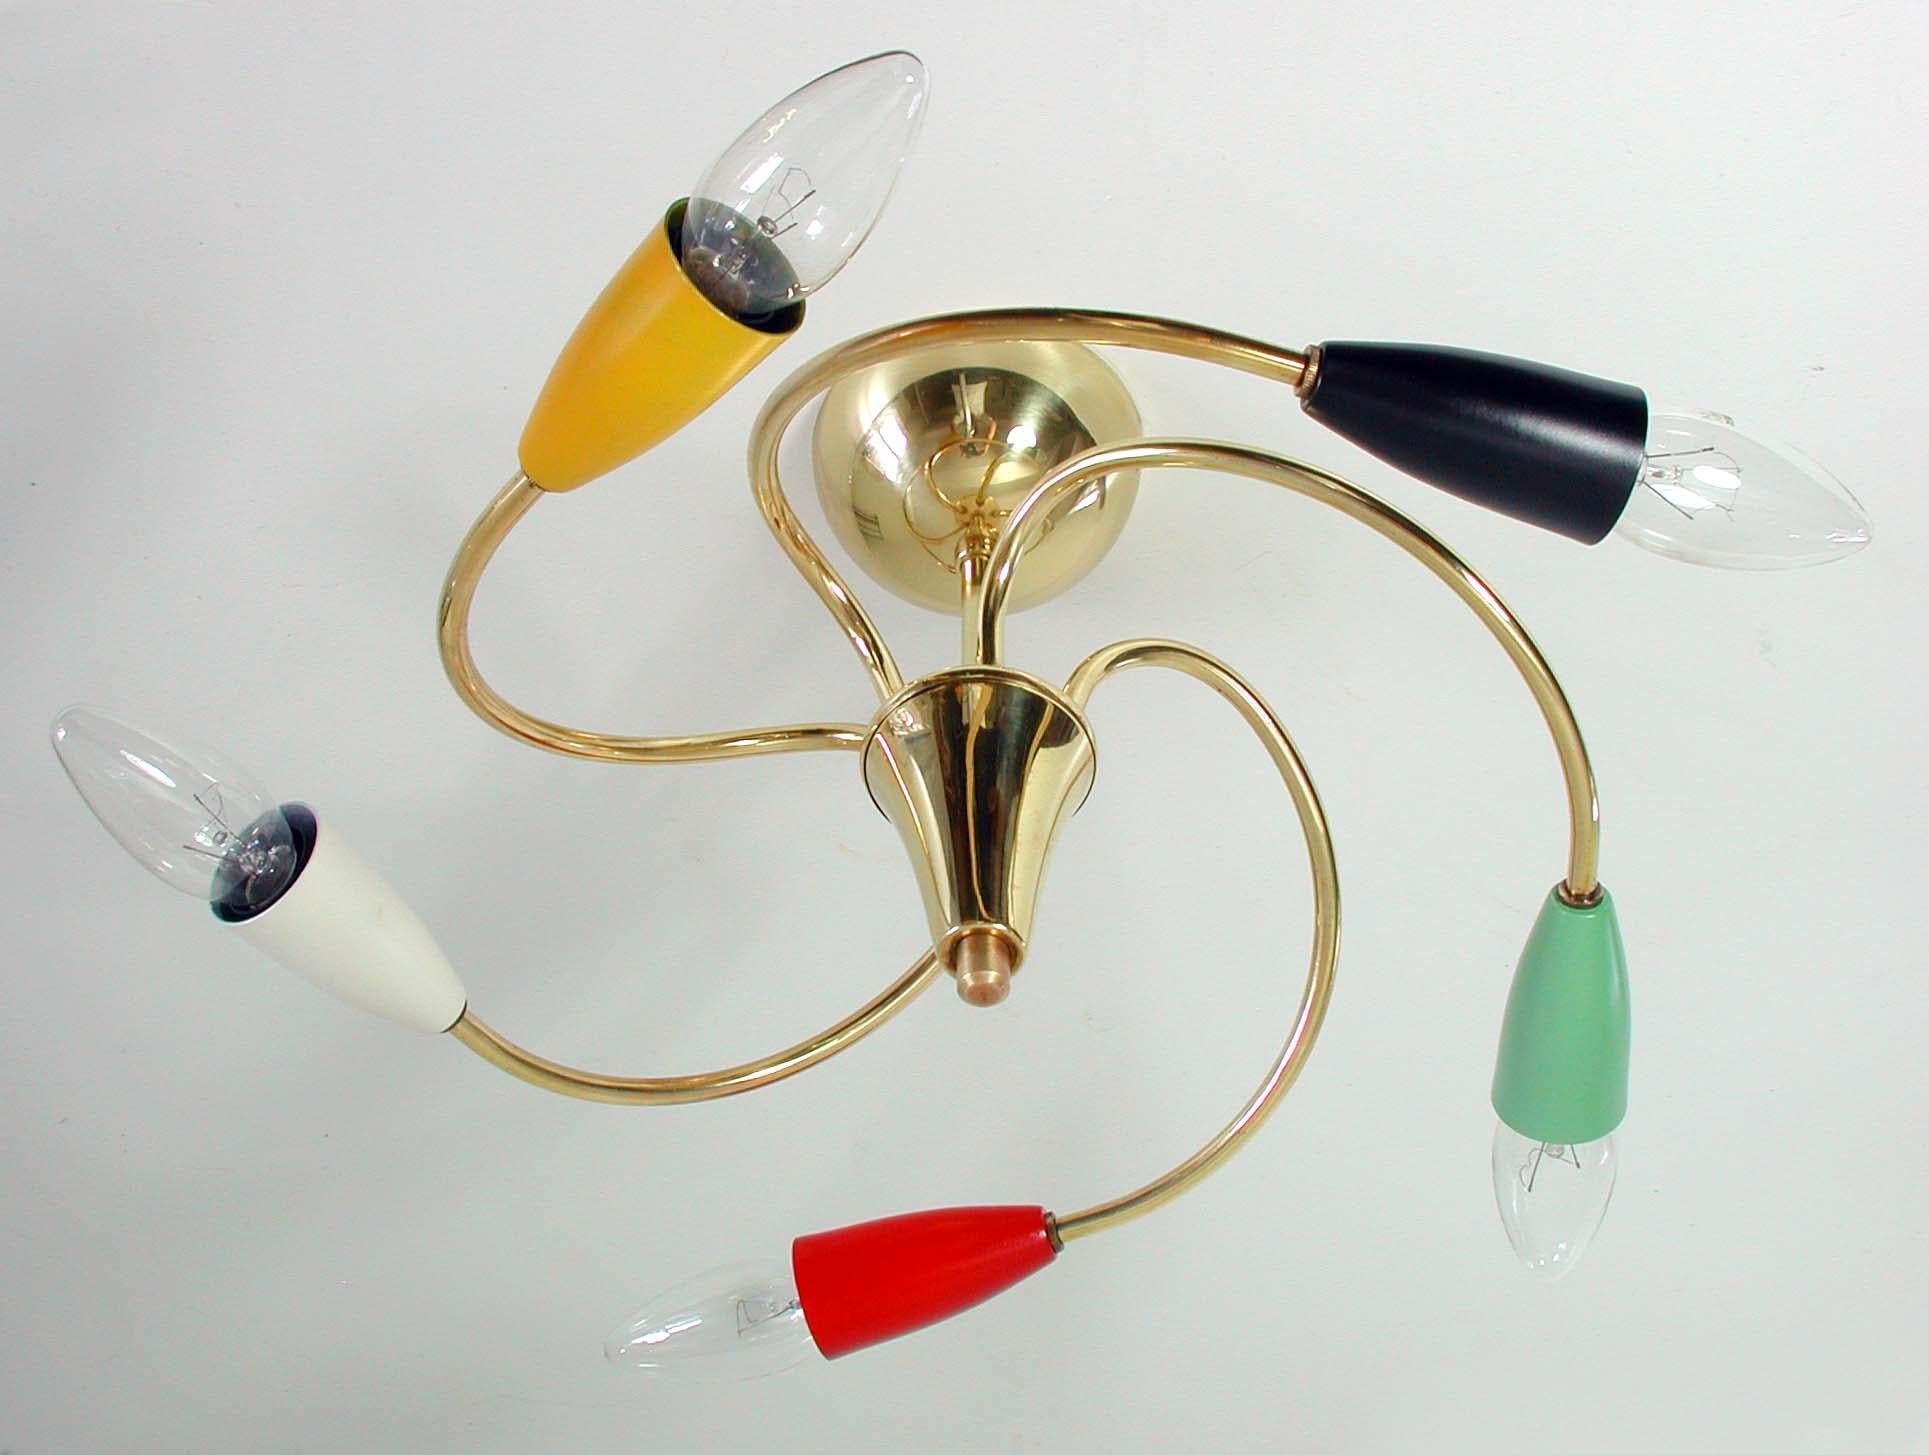 This Mid-Century Modern lamp was made in Italy in the 1950s. It is made of brass and multi colored lacquered metal and has got five lights. The colors are green, red, yellow, cream and black. Each bulb holders requires a E14 bulb.

It can be used